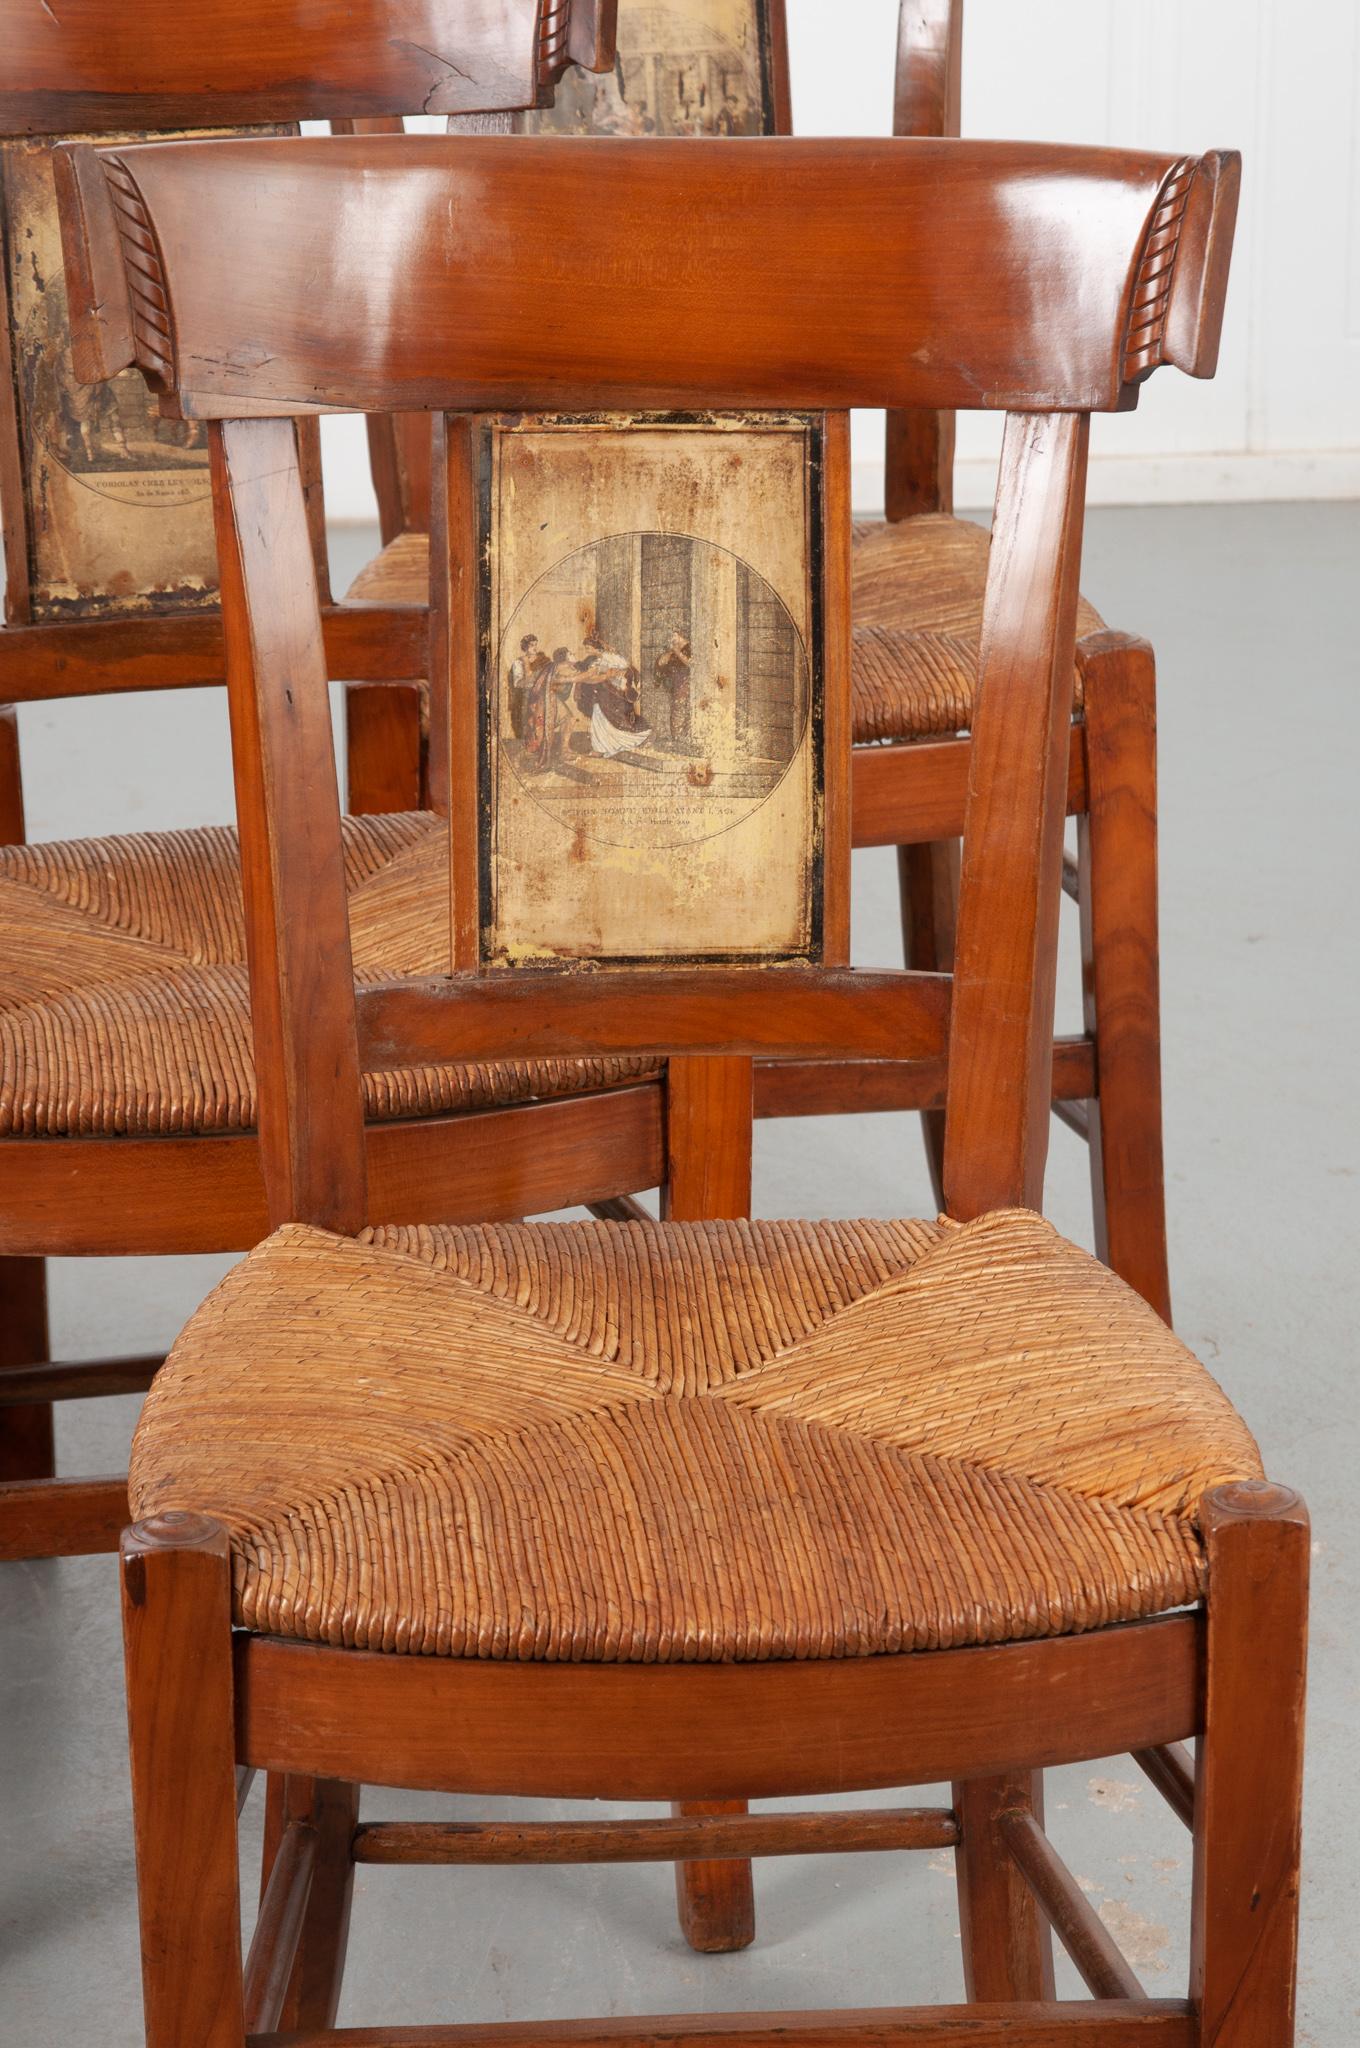 This set of chairs is dripping with unique detail! The fruitwood frames have been cleaned and polished to reveal the vibrant tones and grain. Each seat back is carved at the top and decoupaged with a different scene of Greco-Roman events,